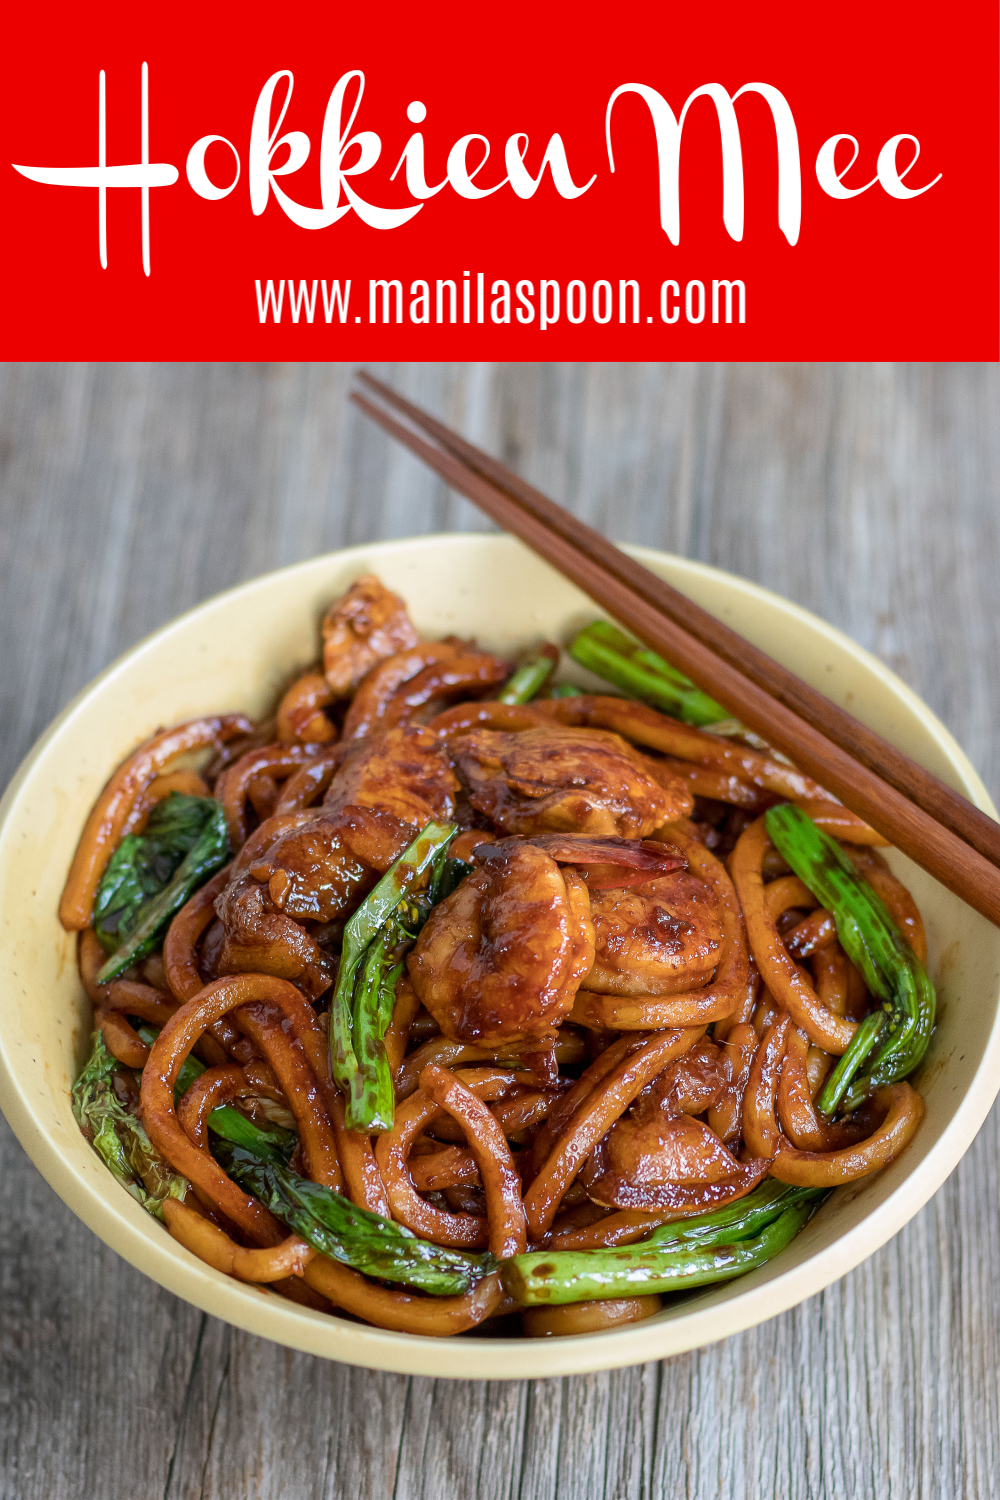 The use of dark soy sauce gives this tasty noodle dish - Hokkien Mee - an eye-catching hue. With prawn or shrimp, chicken and pork belly added to the mix, you’re sure to enjoy this very tasty Malaysian staple. It’s also simple to make and one that you’ll add to your menu rotation on a regular basis. #hokkienmee #noodlestirfry #asiancuisine #malaysiancuisine